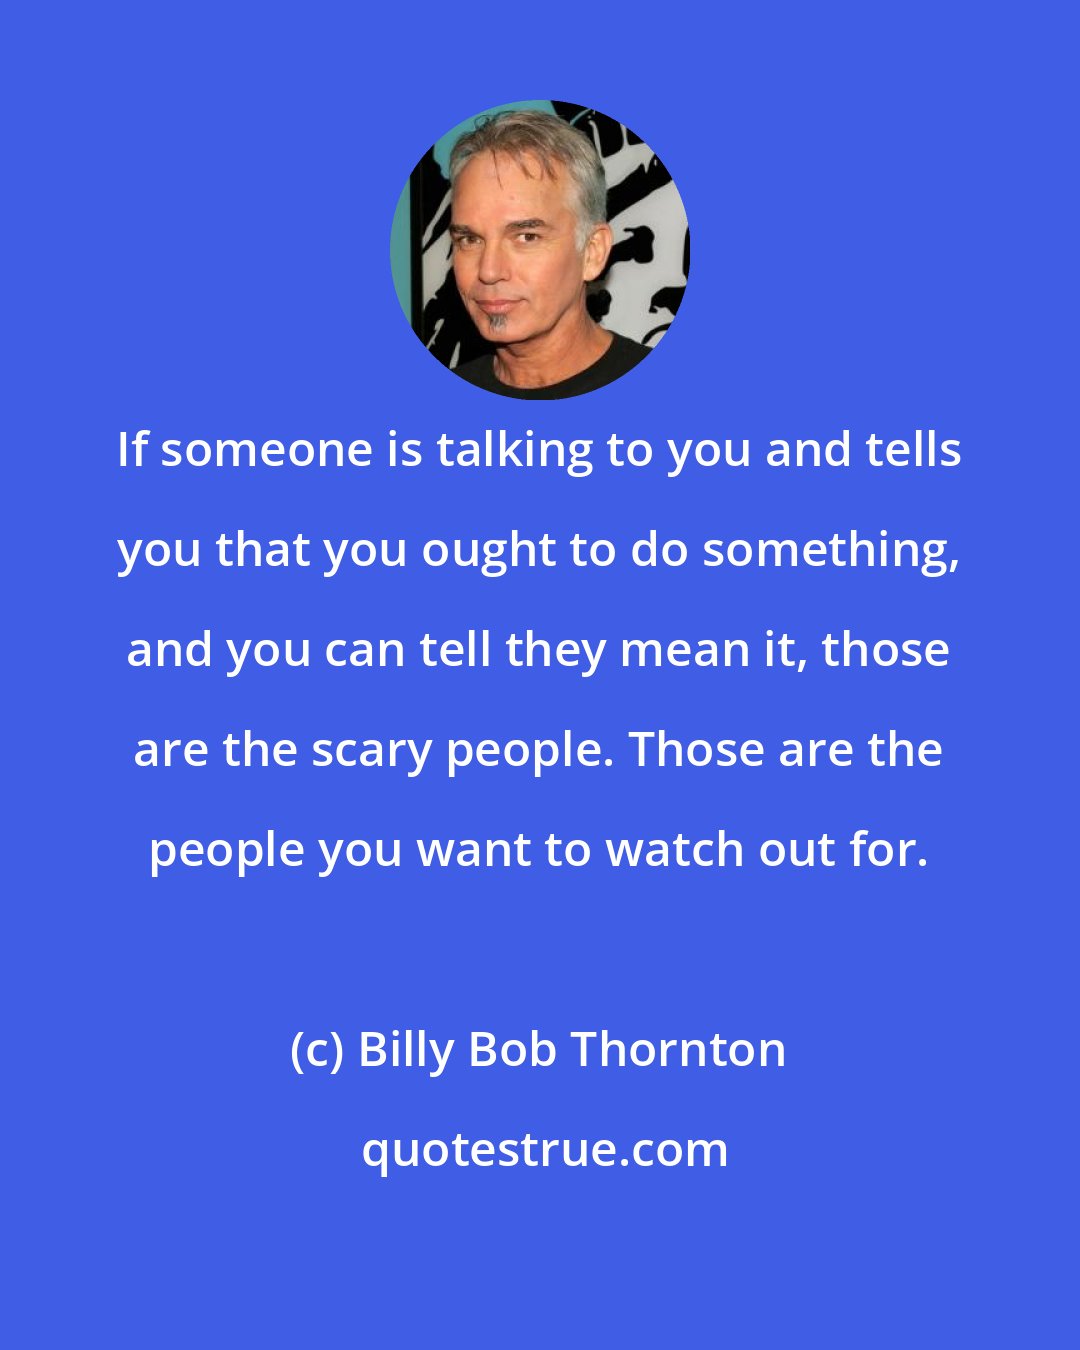 Billy Bob Thornton: If someone is talking to you and tells you that you ought to do something, and you can tell they mean it, those are the scary people. Those are the people you want to watch out for.